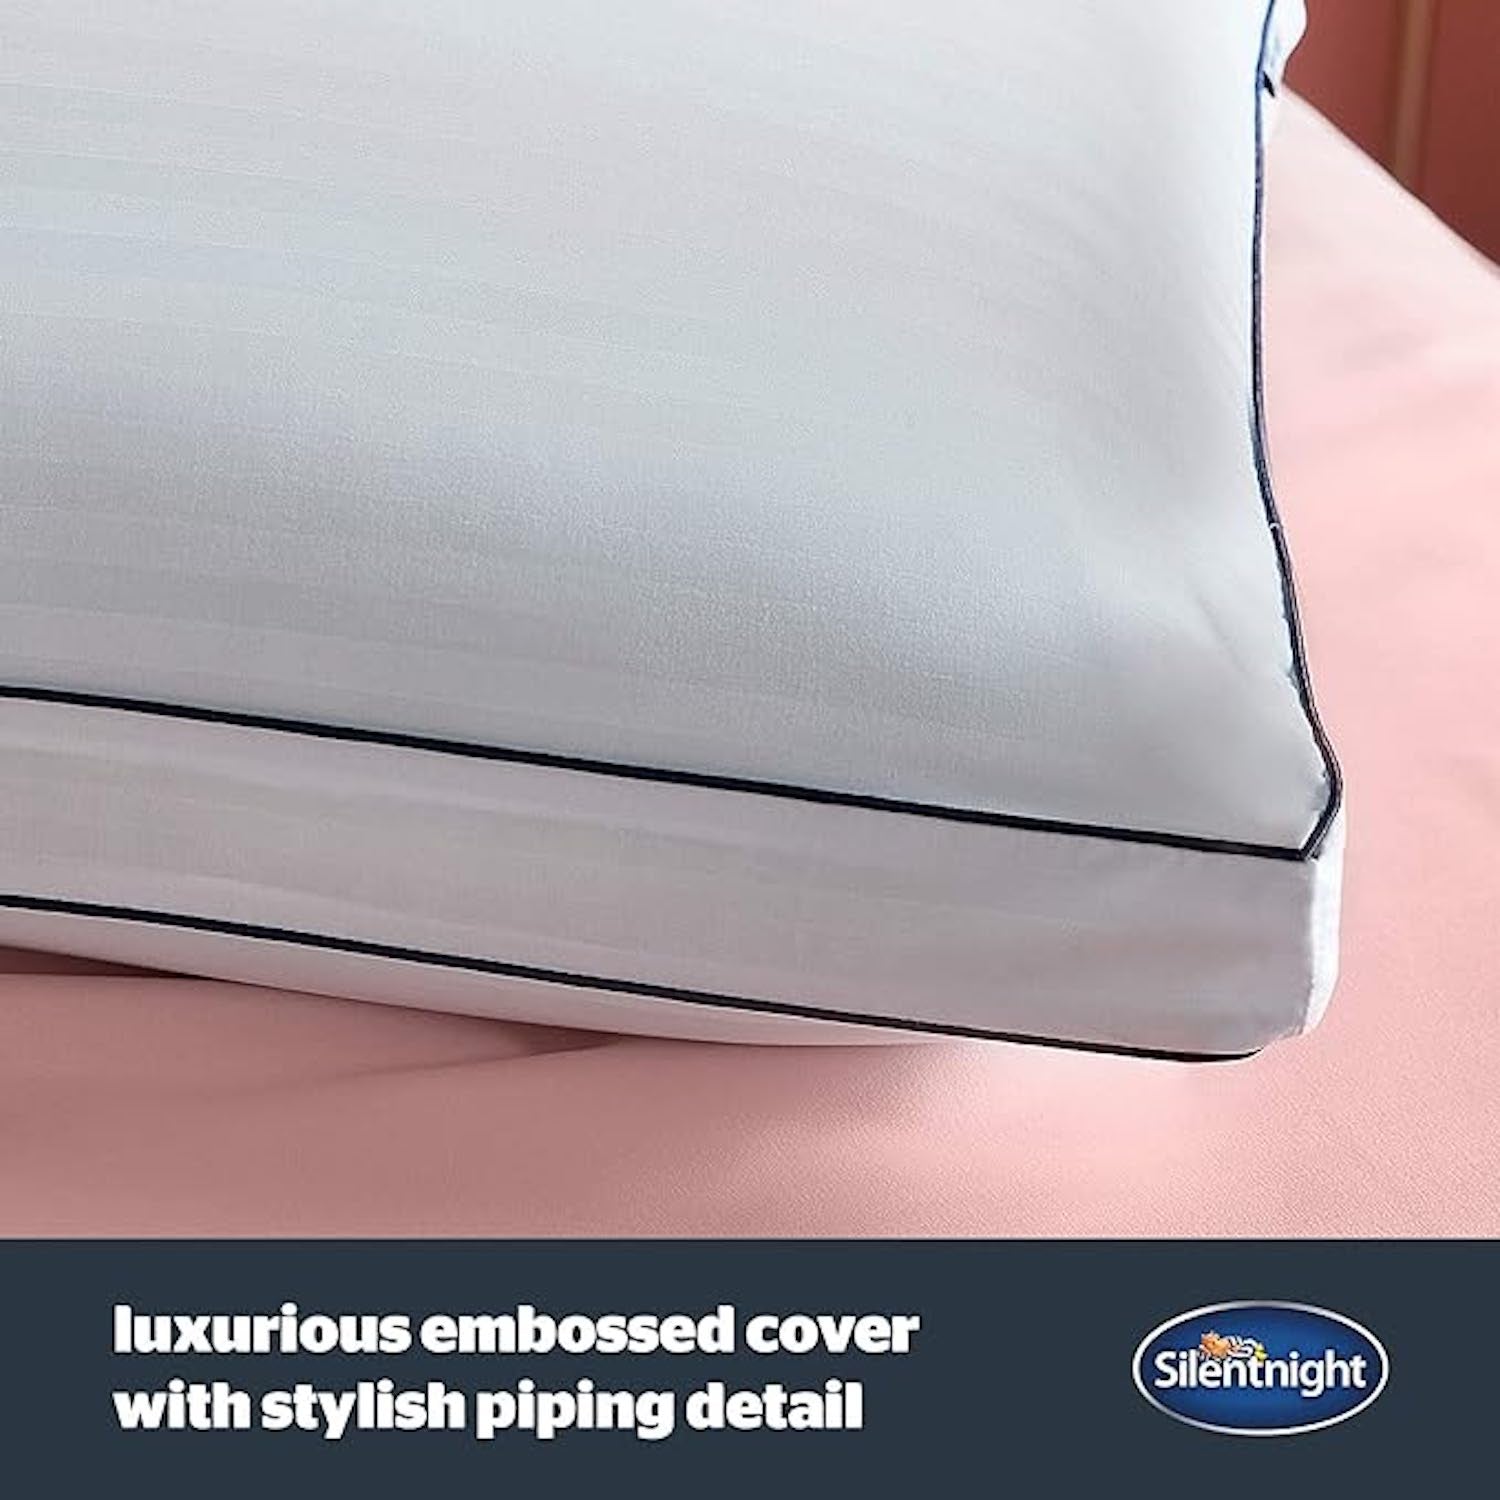 The Silentnight Hotel Collection Box Pillow comes in a luxurious embossed cover with stylish piping detail 